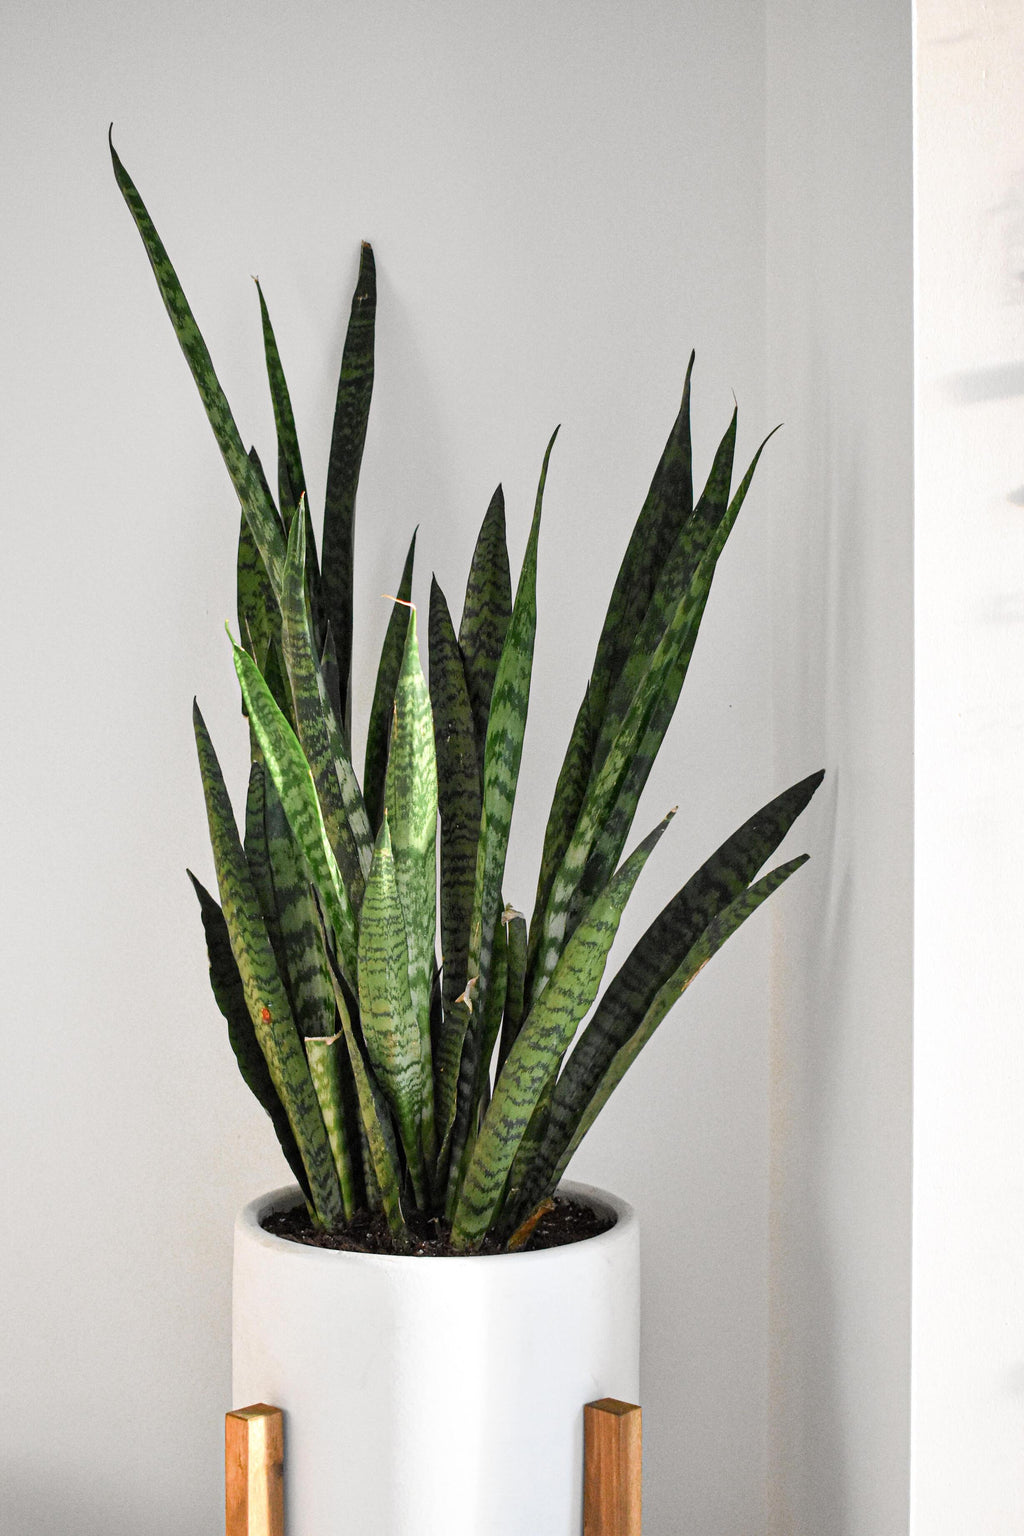 Good Vibes Only! 5 plants that bring positive energy into your home